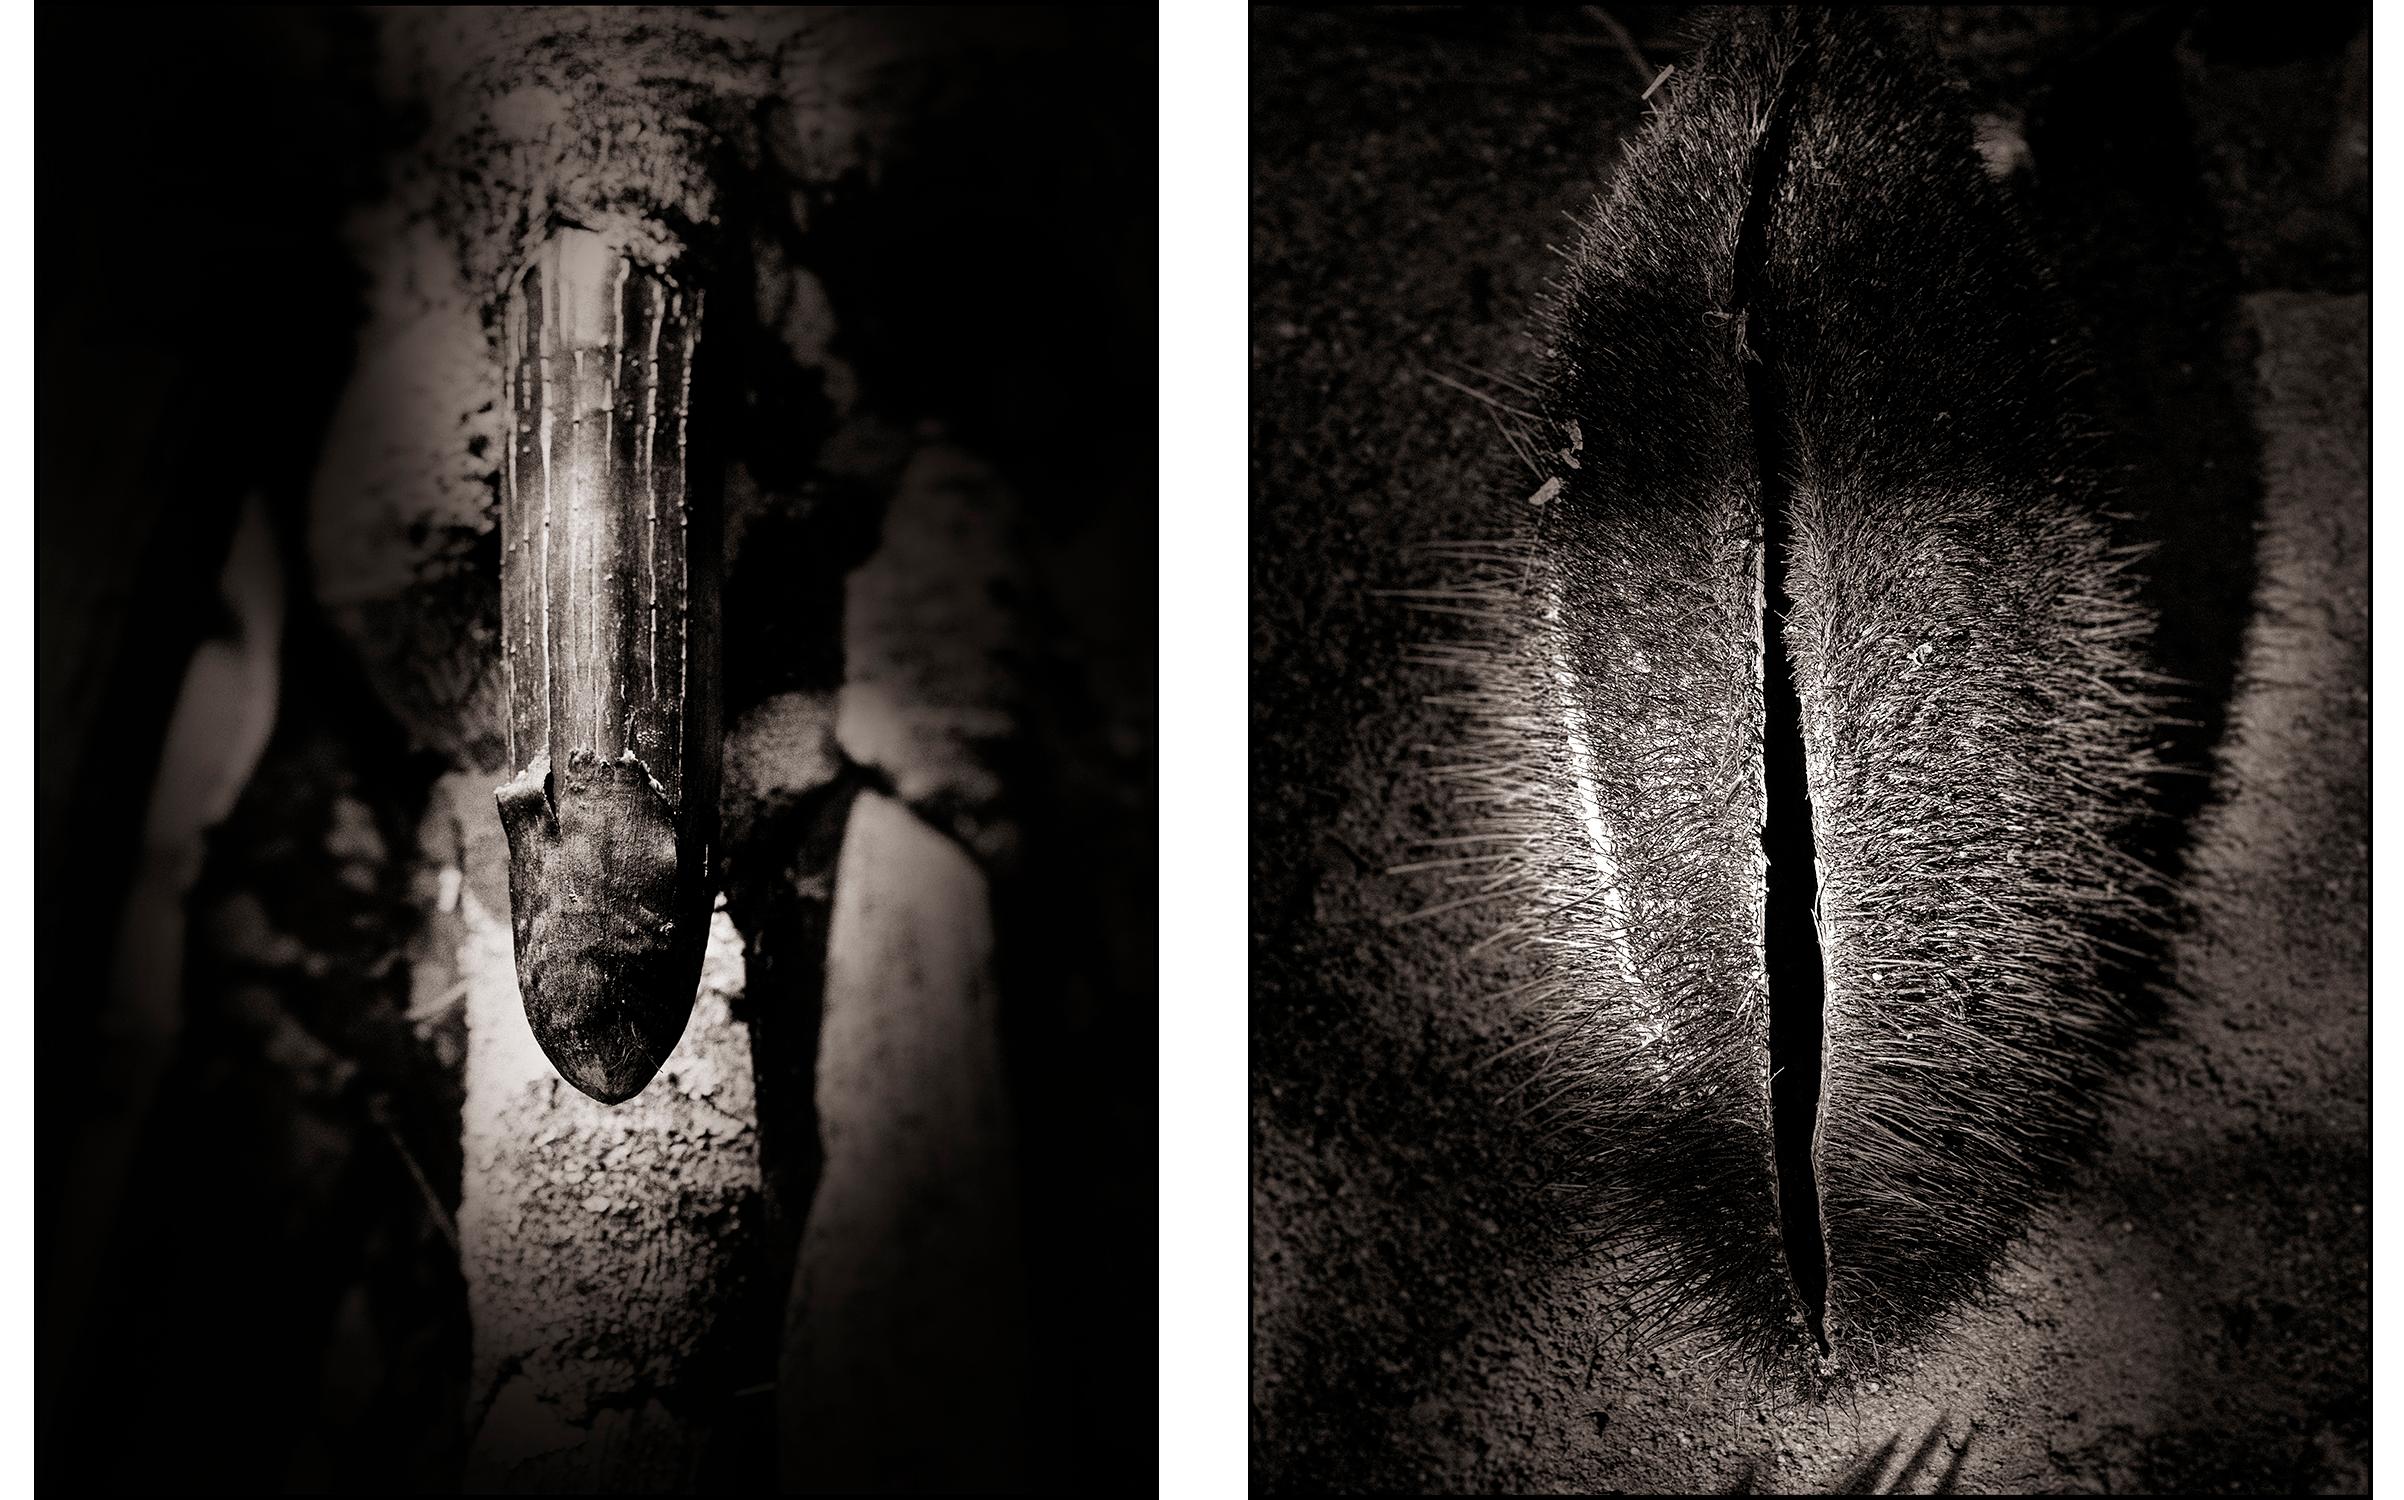 This Diptych consists of 2 images, each  52,5 x 70 cm.
Edition of 25
signed and numbered by the artist

The Seychelles palm, also known as the Seychelles nut, is an endemic palm species that occurs exclusively in the Seychelles. Its seeds are the